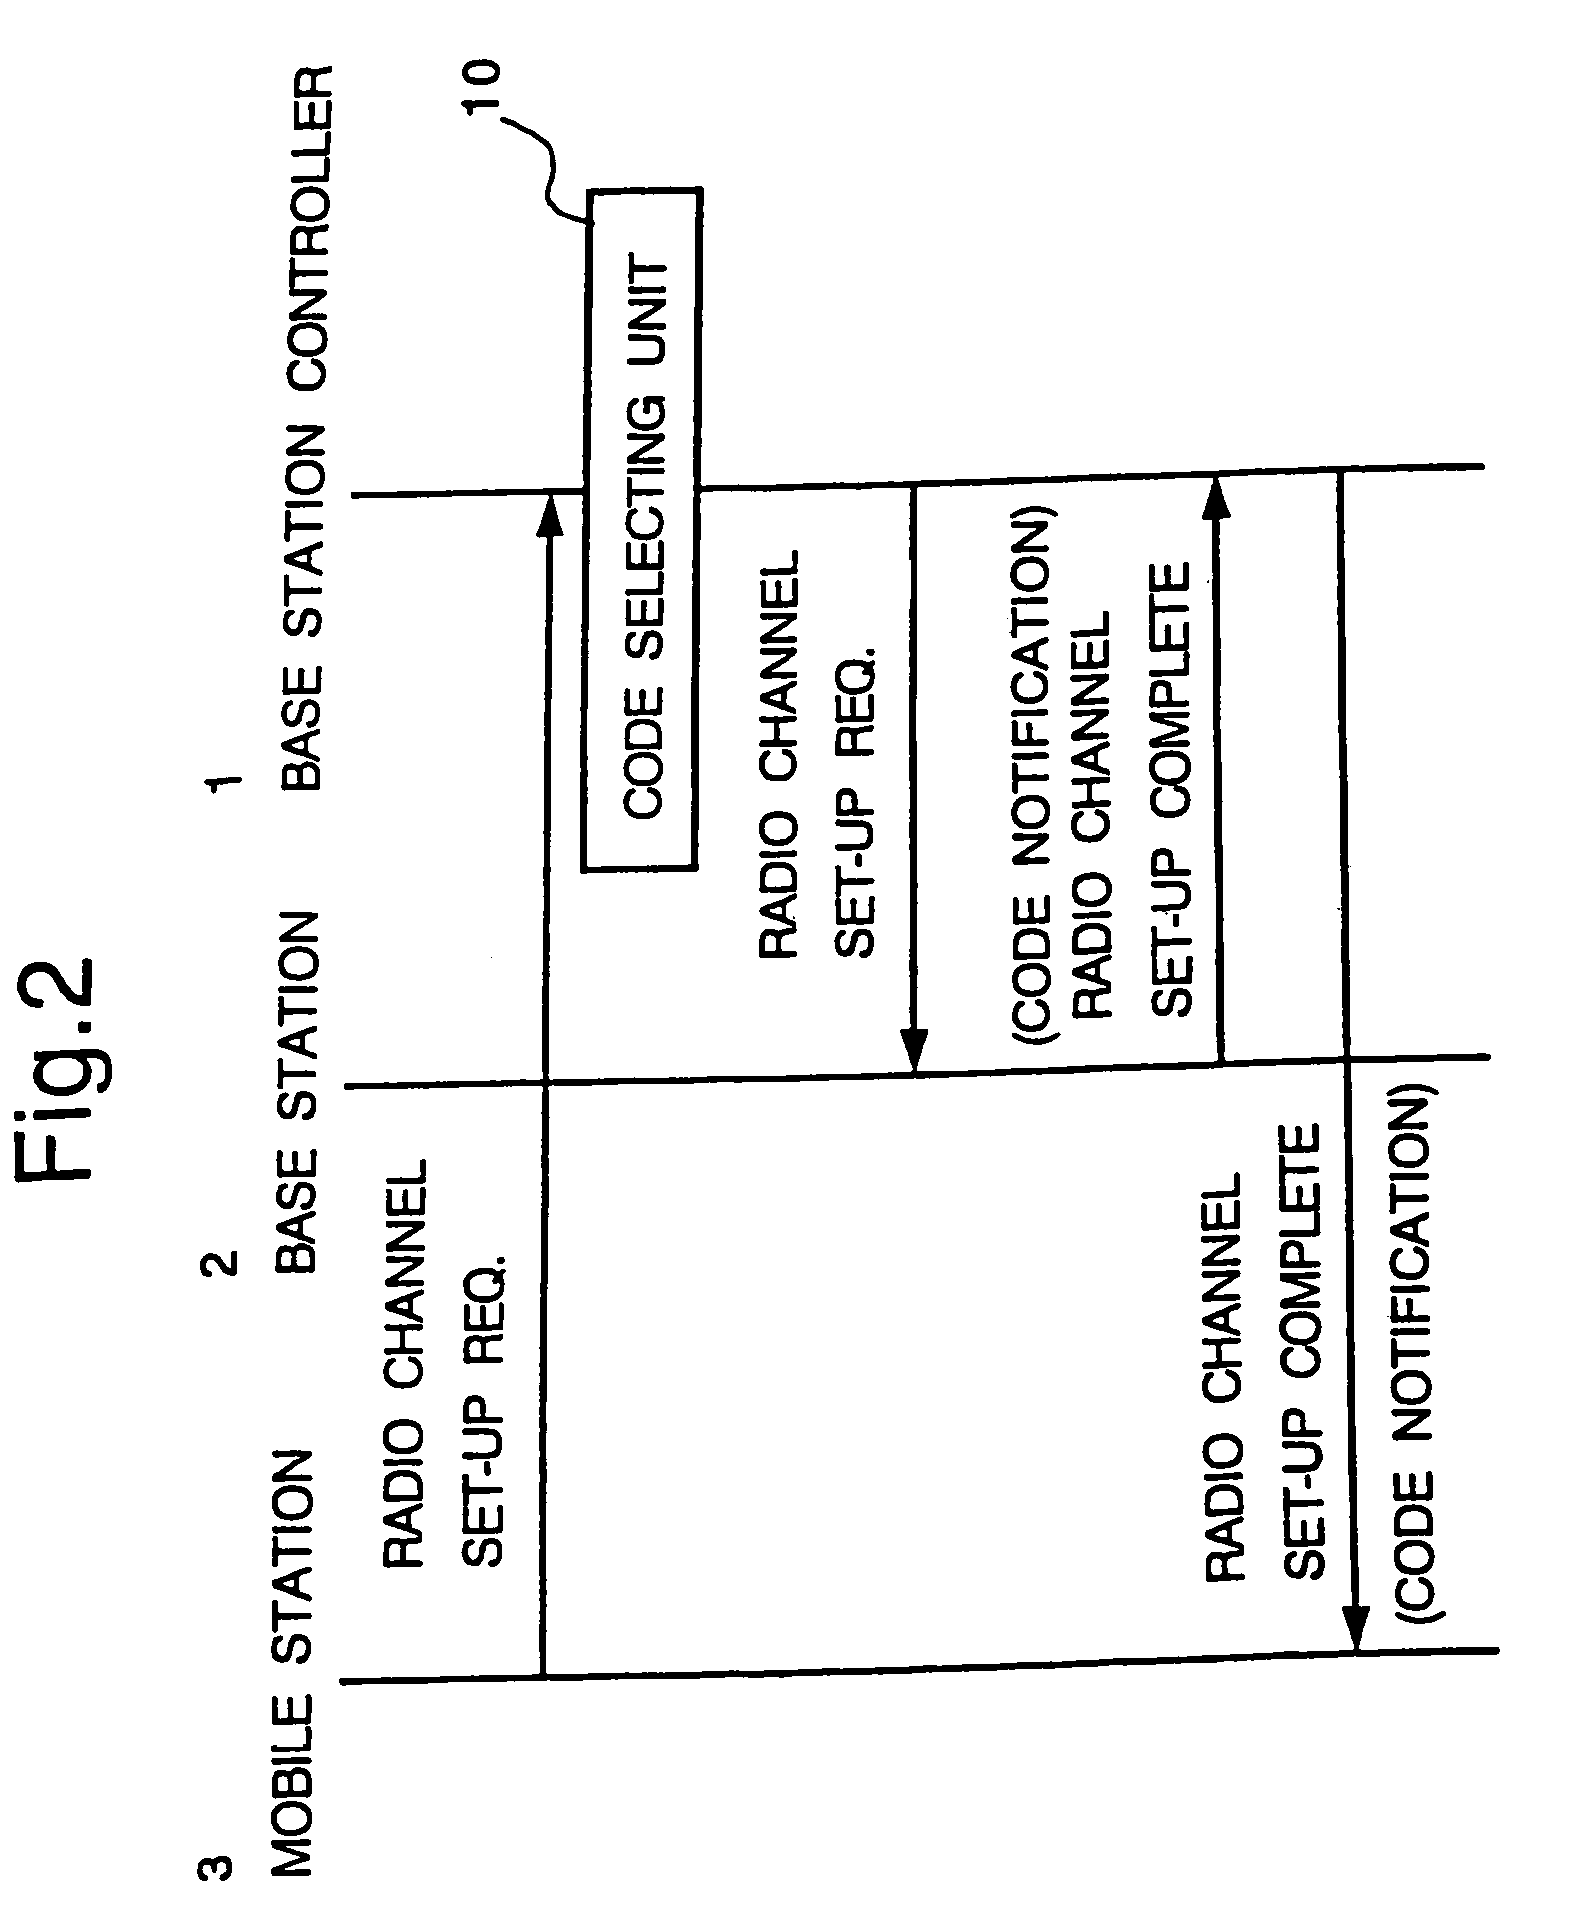 Method and apparatus for assigning codes